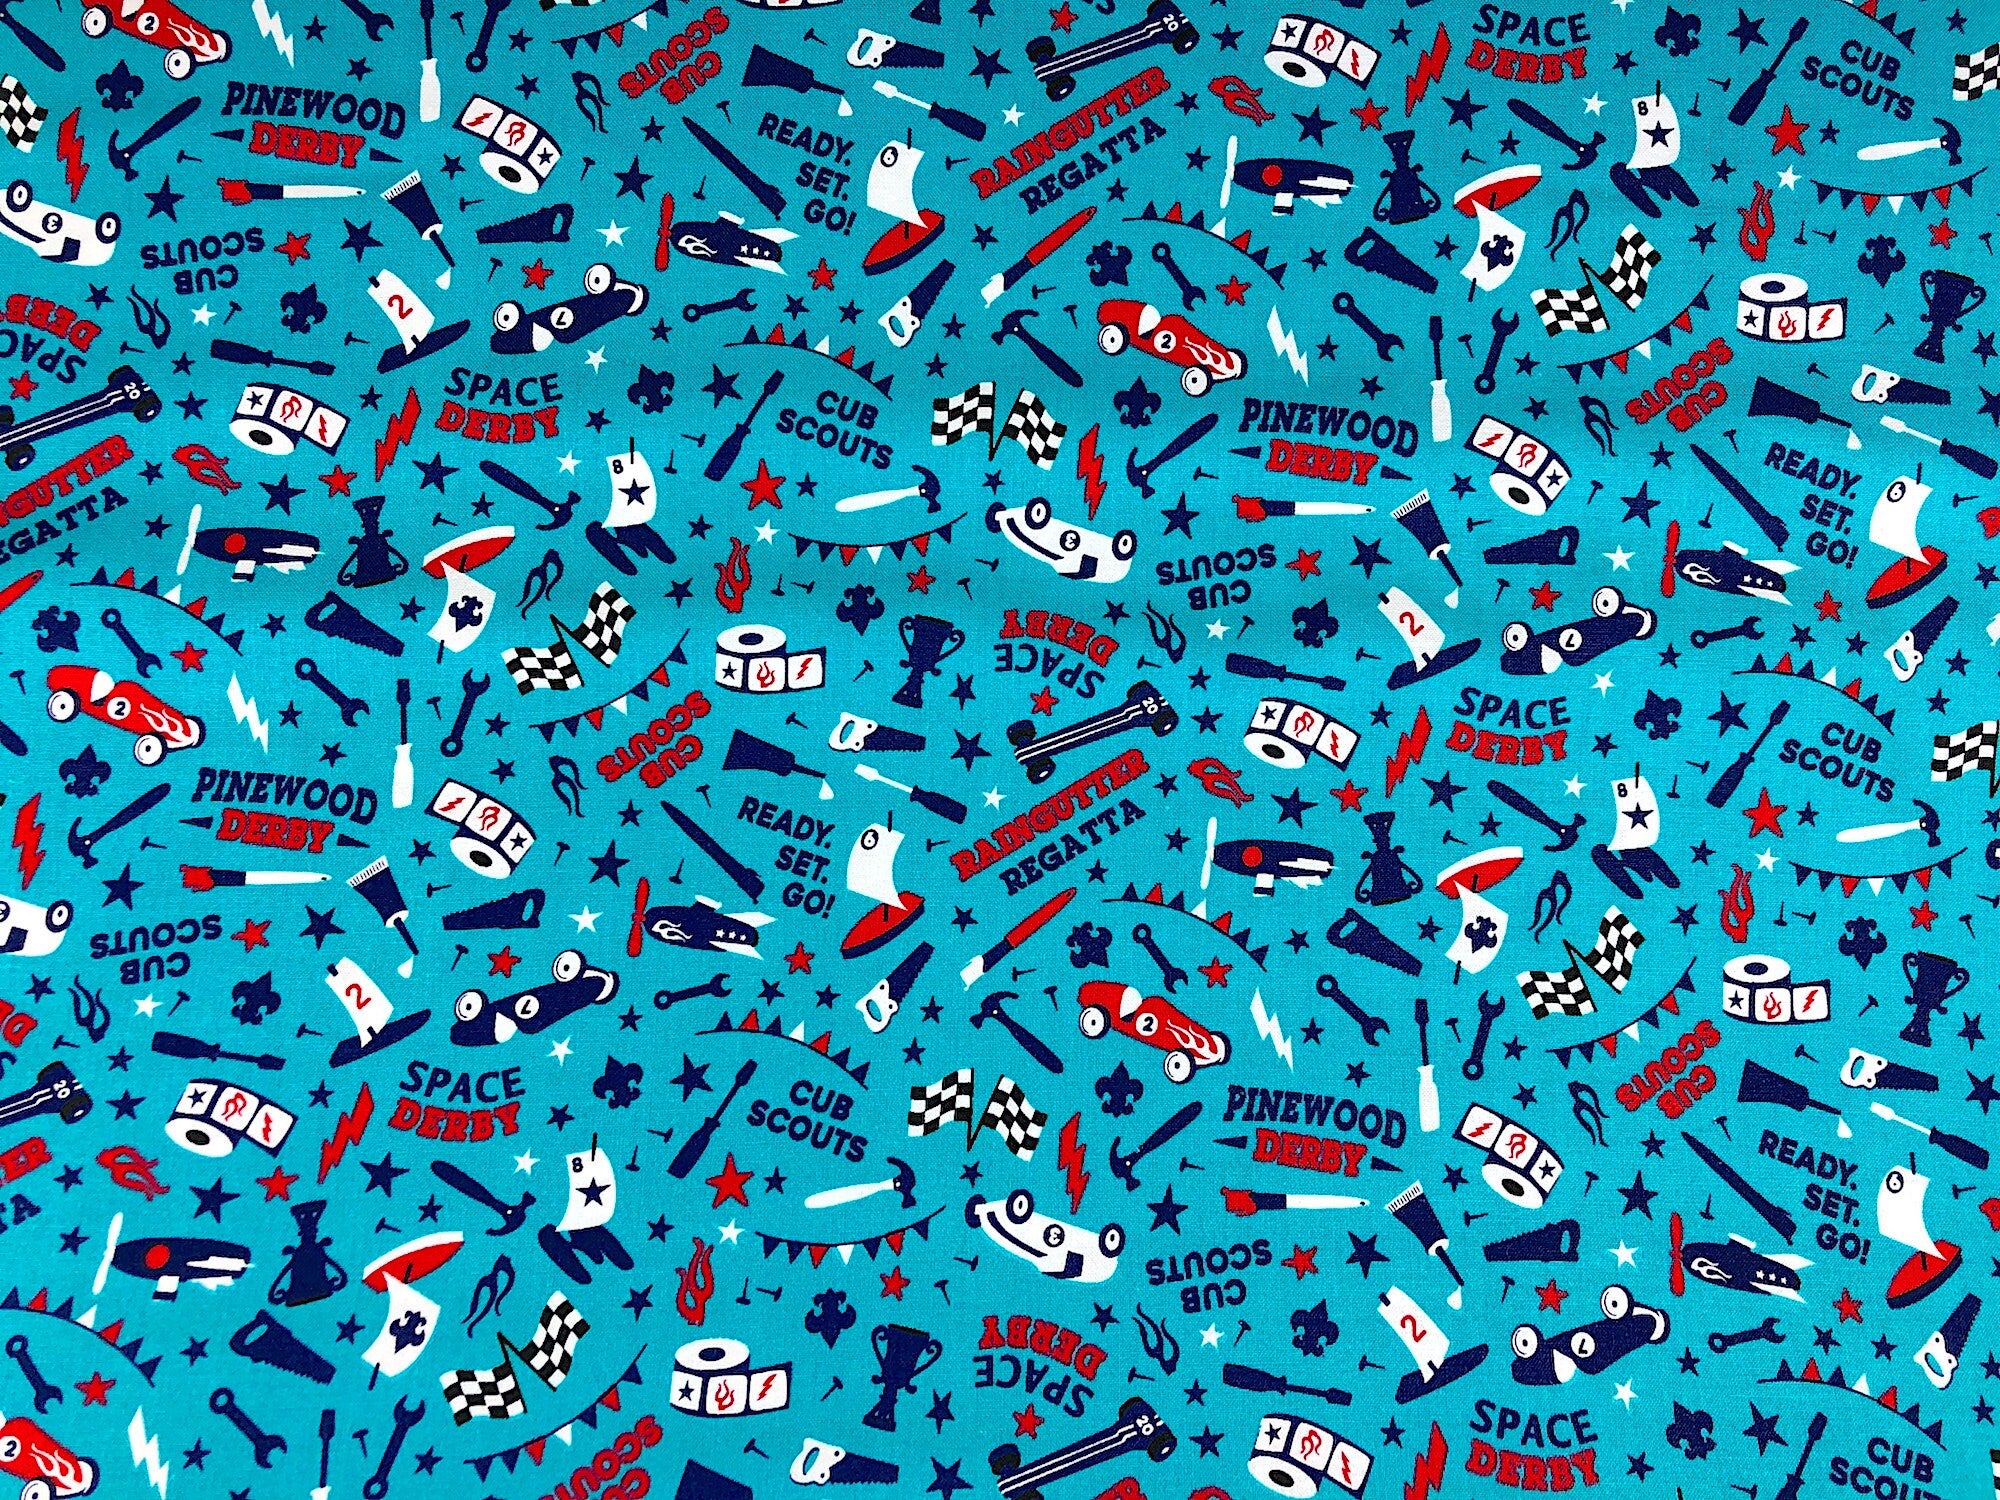 This fabric is called Cub Scouts Derby teal and is covered with hammers, saws, wrenches, paint brushes, cars and flags. Bub Scouts, Ready Set Go and Space Derby are just a few of the words printed on the teal fabric.